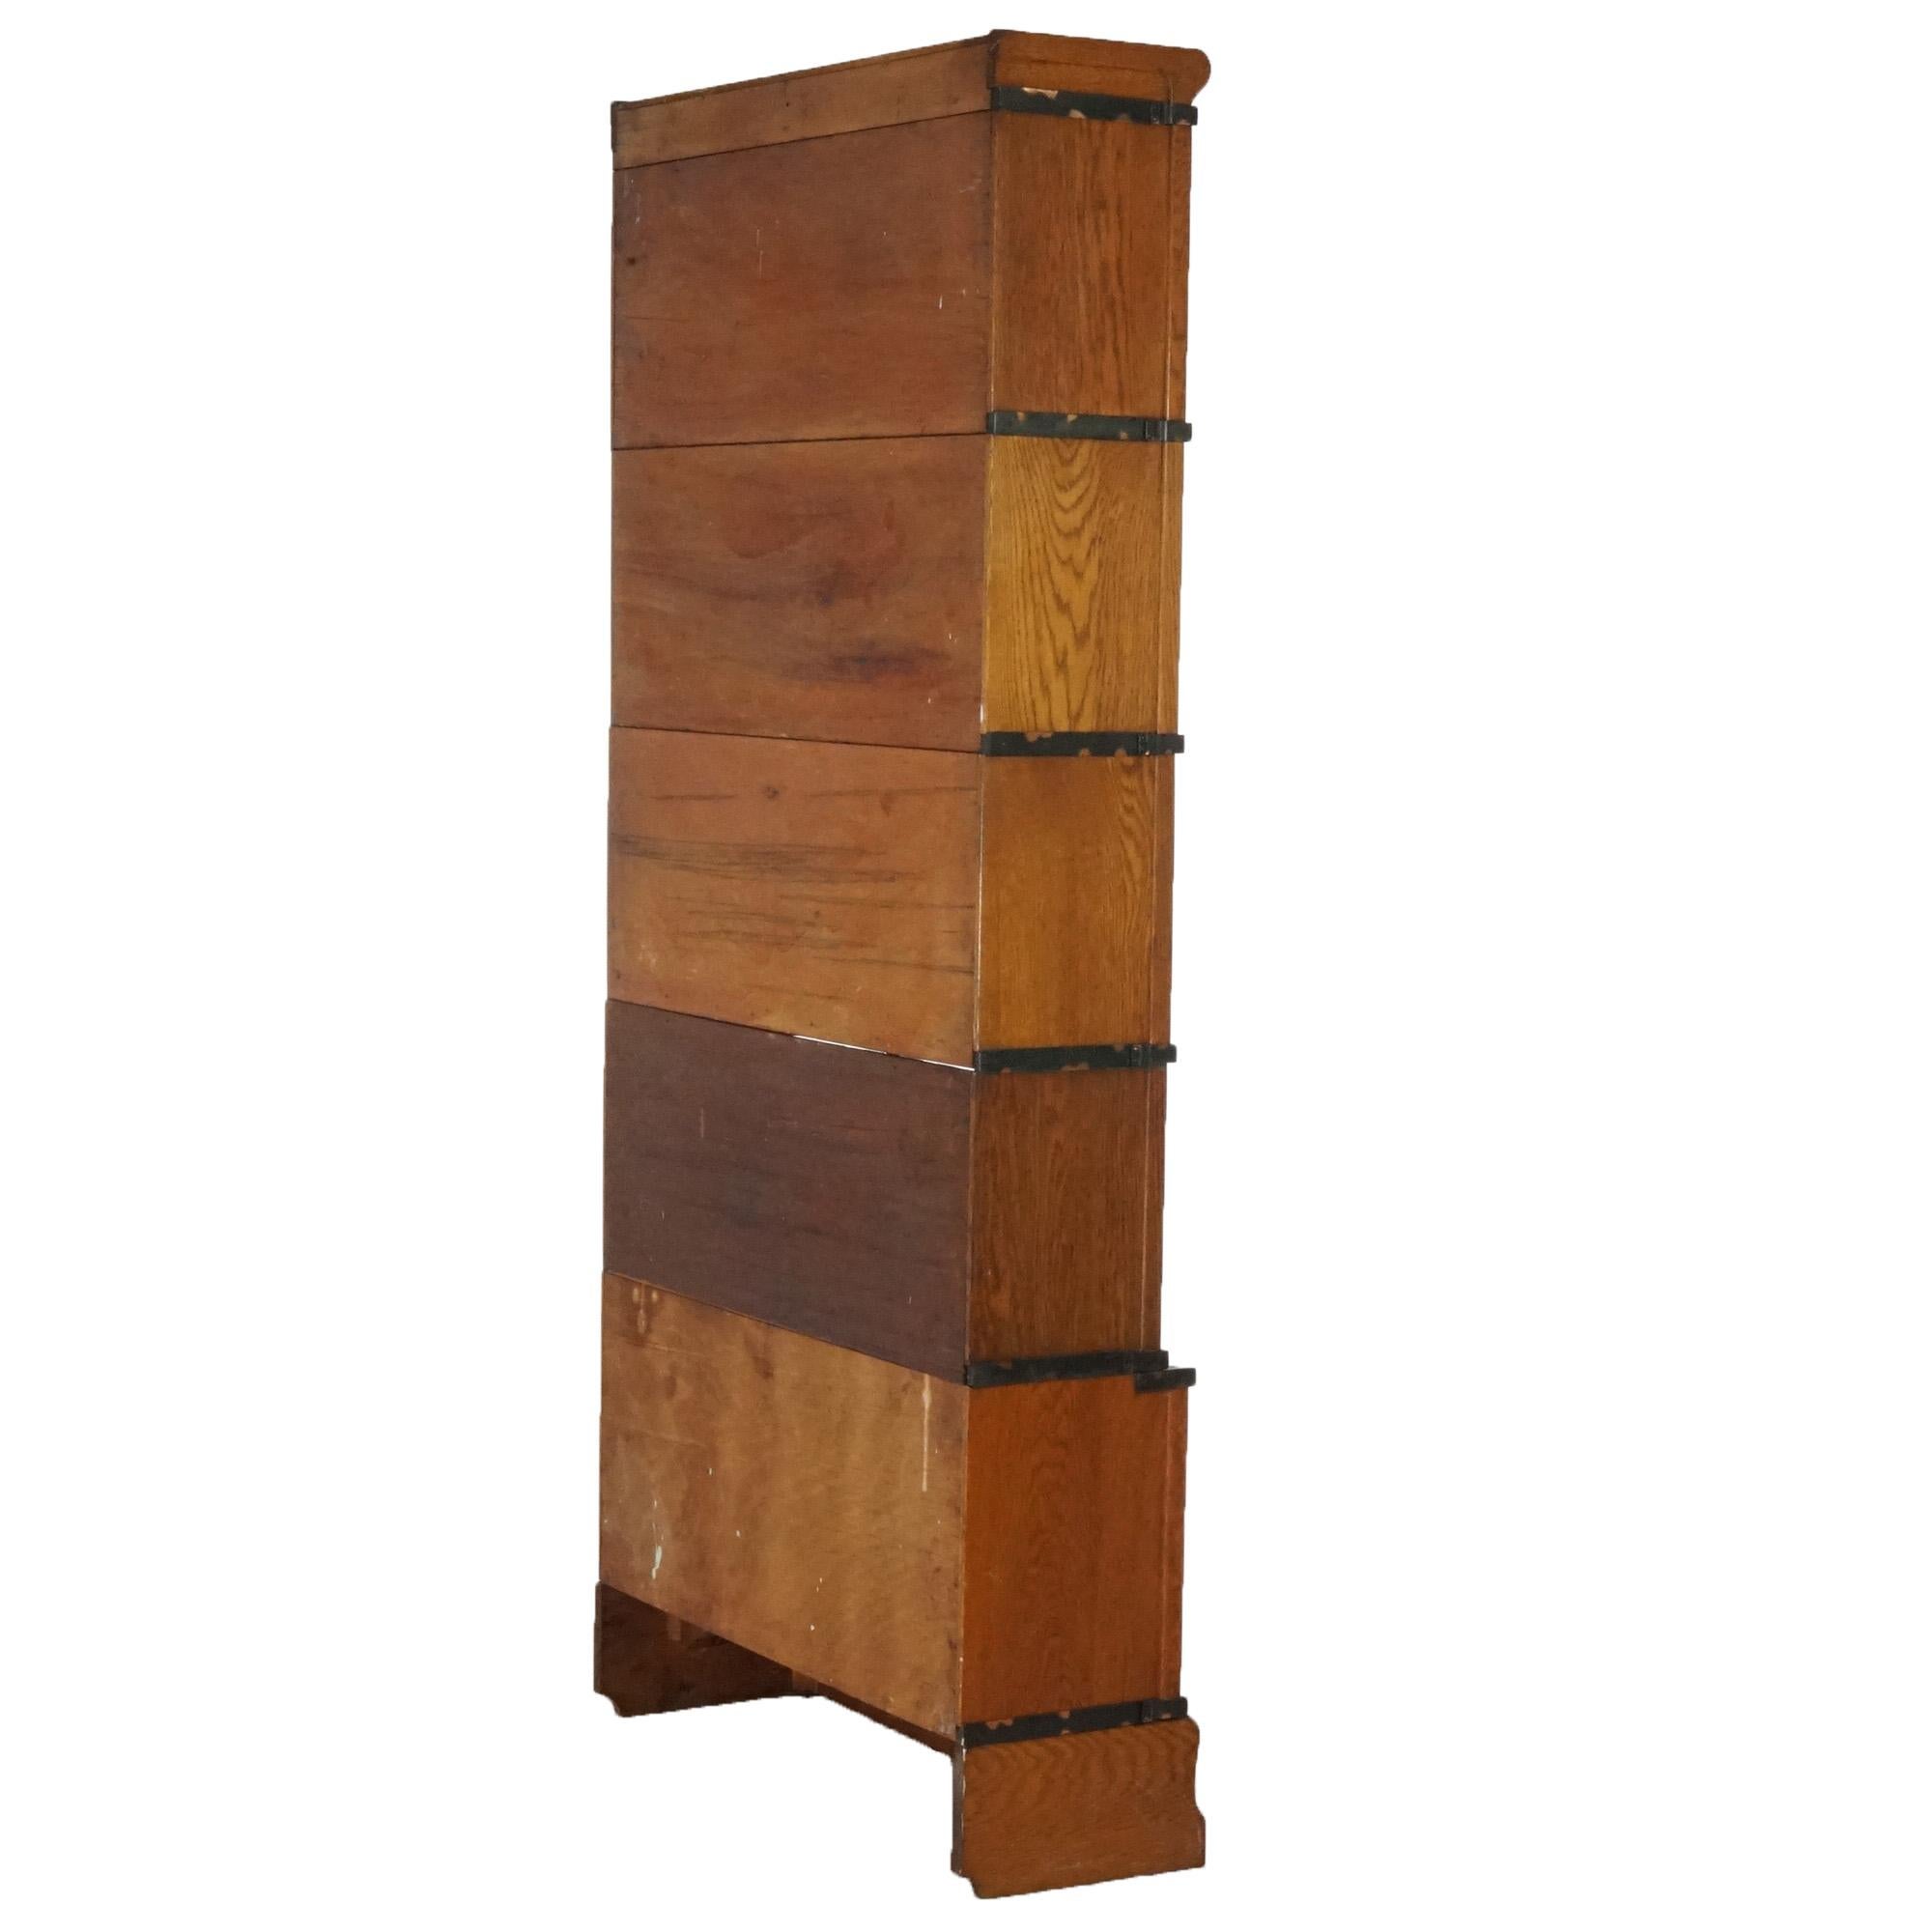 American Antique Art & Crafts Mission Oak Globe Wernicke Barrister Bookcase with Filer